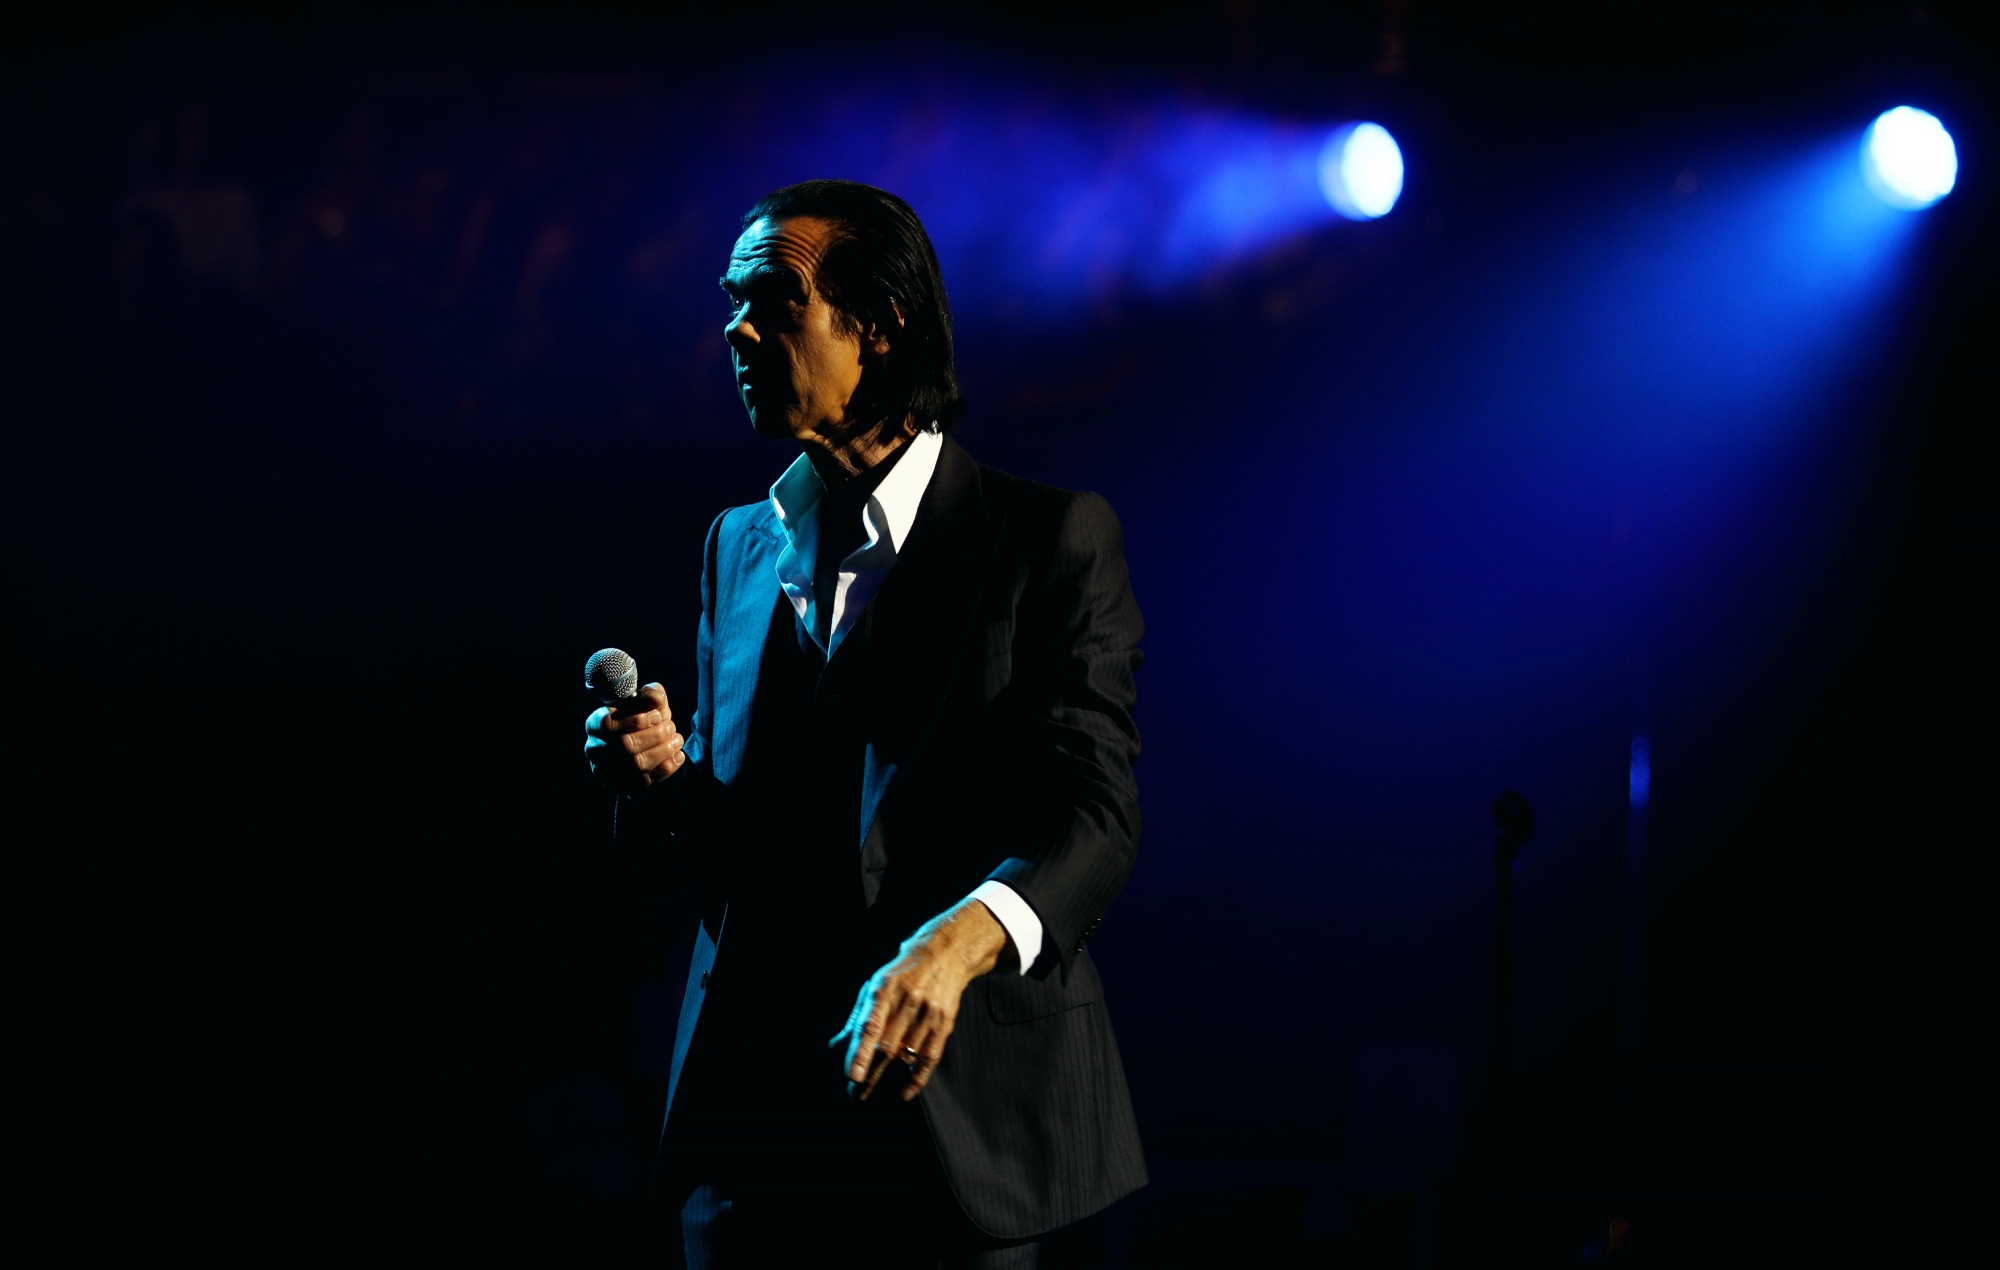 Nick Cave shares his “great elation” at becoming a grandfather